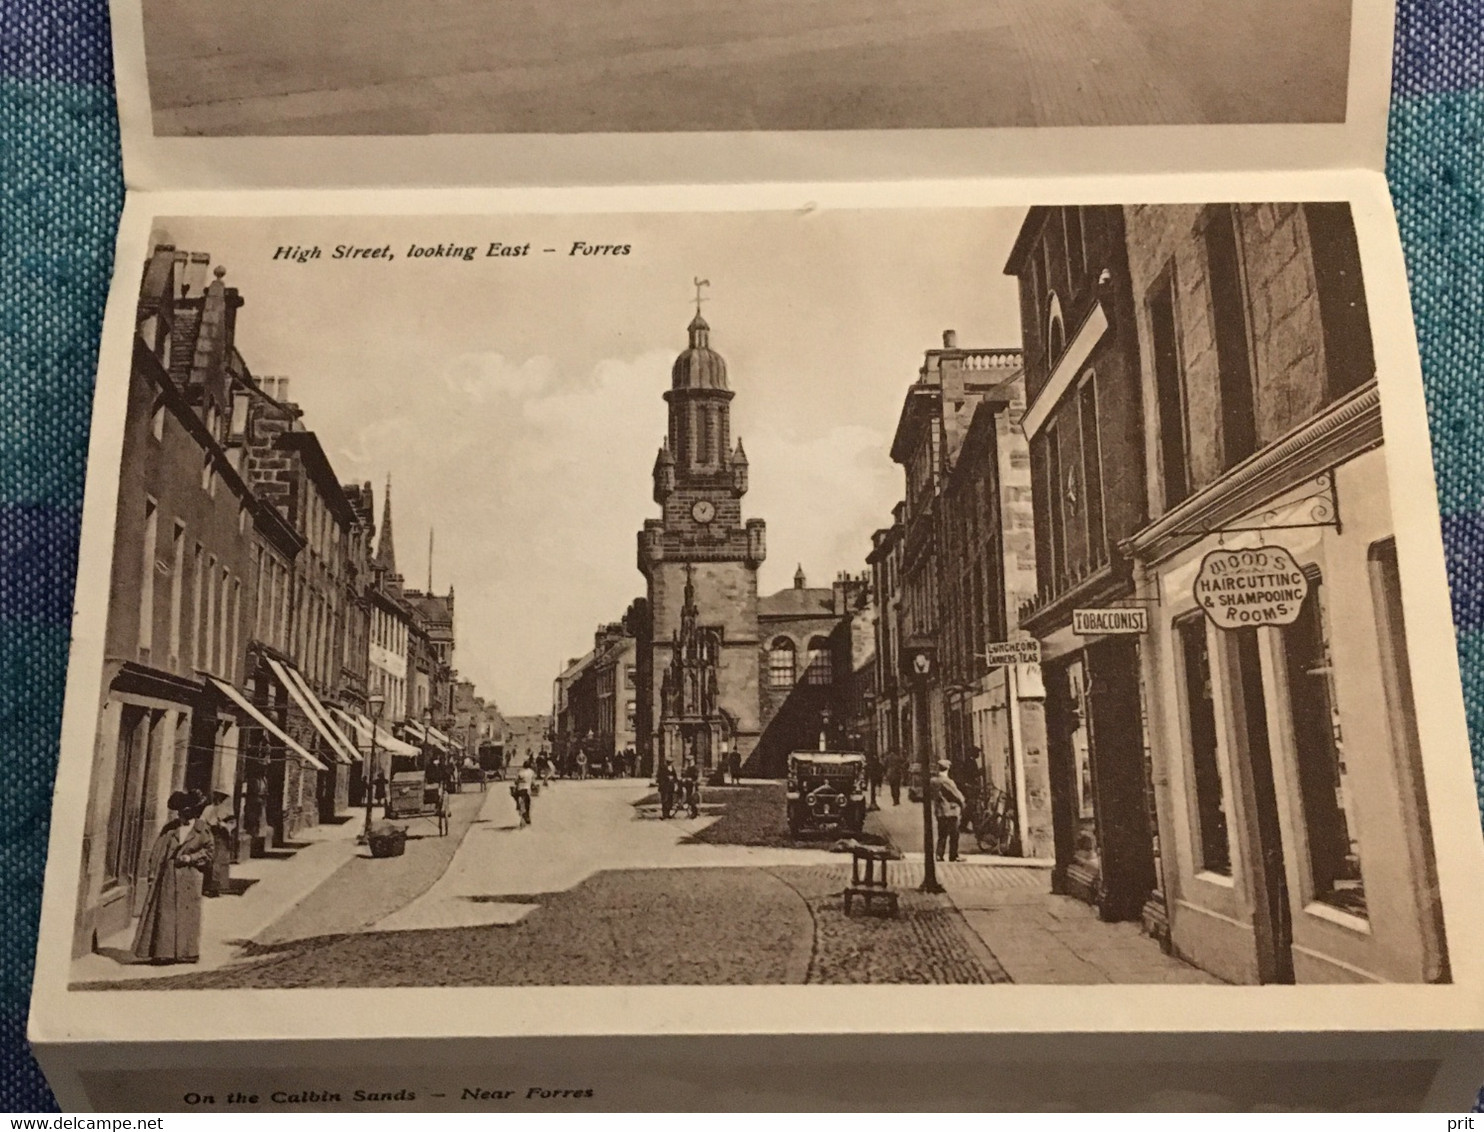 Souvenir Letter of Forres Scotland 1928 5 Postcards. Stamped 2x1d stamps with significant perforation error. Rare